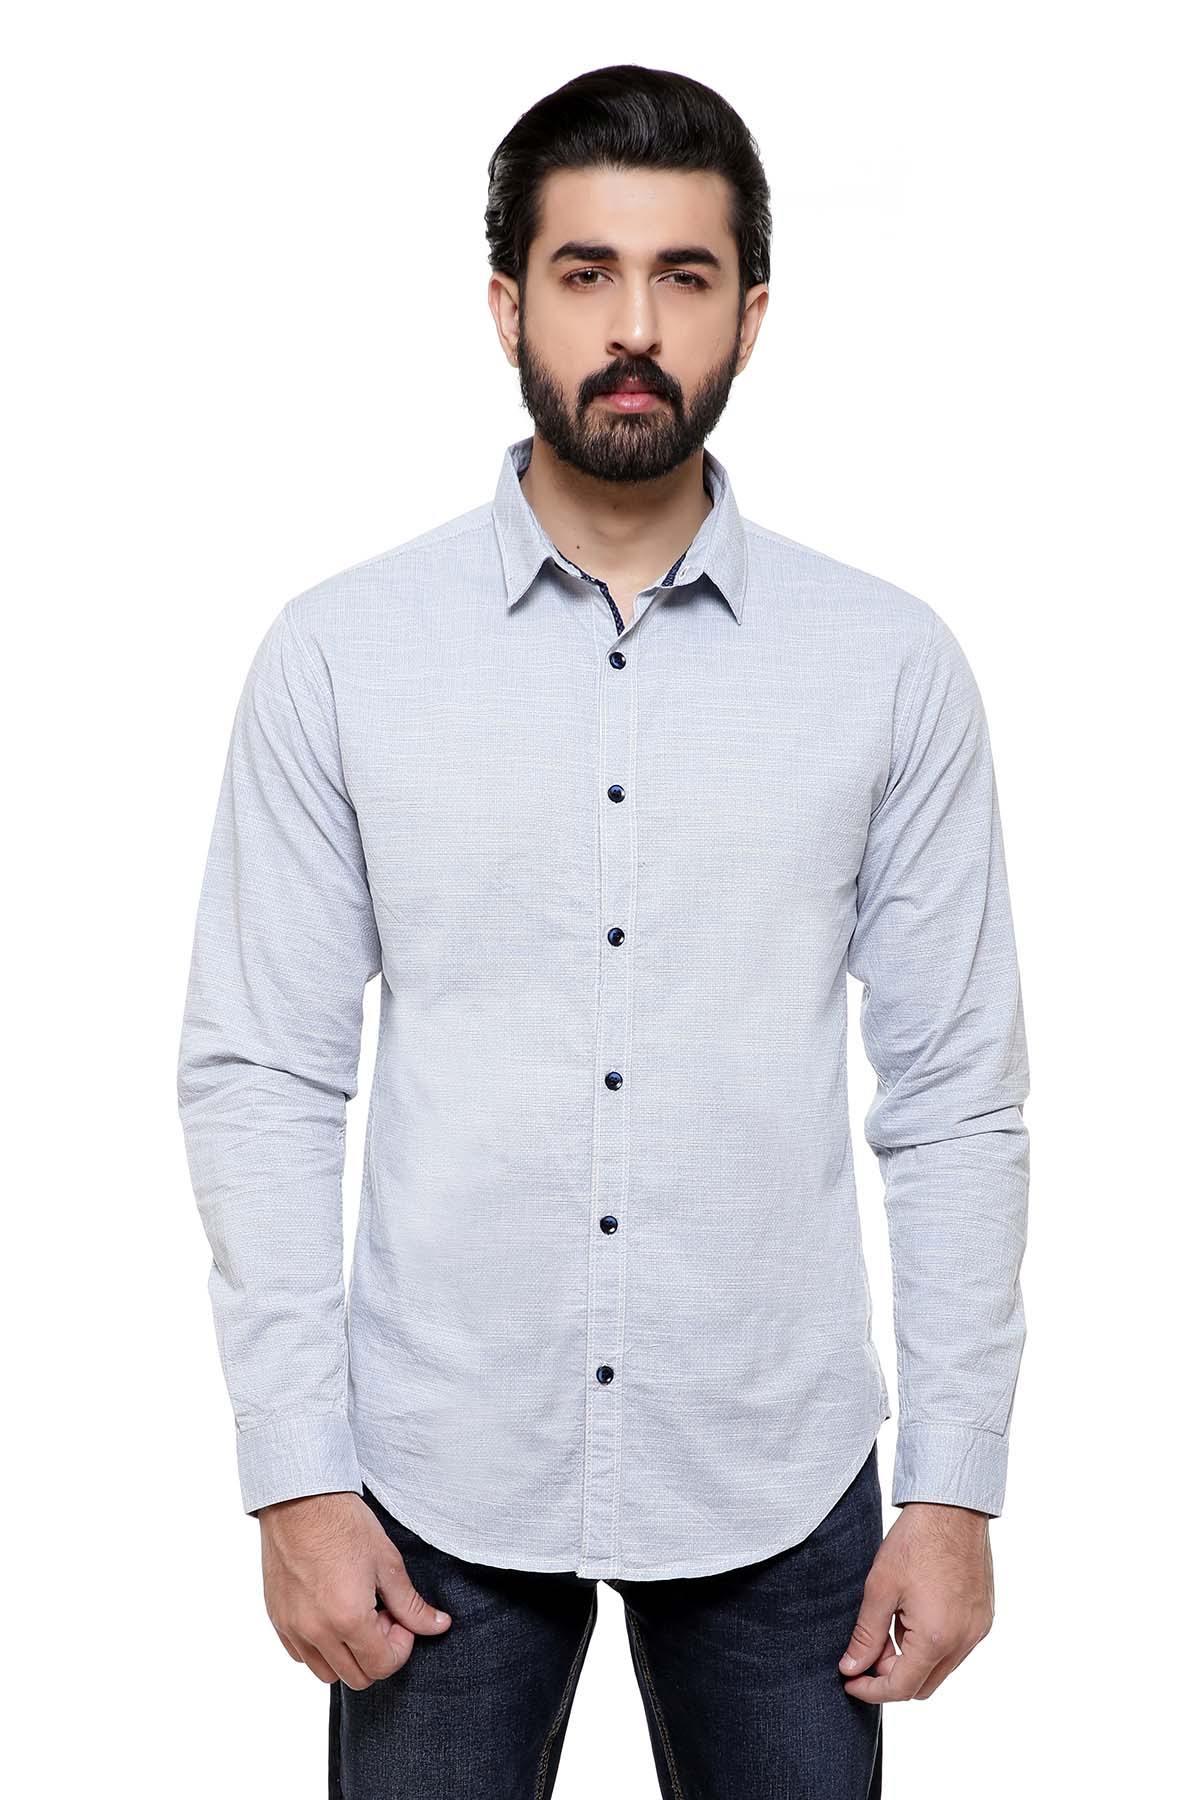 CASUAL SHIRT FULL SLEEVE SKY WHITE at Charcoal Clothing